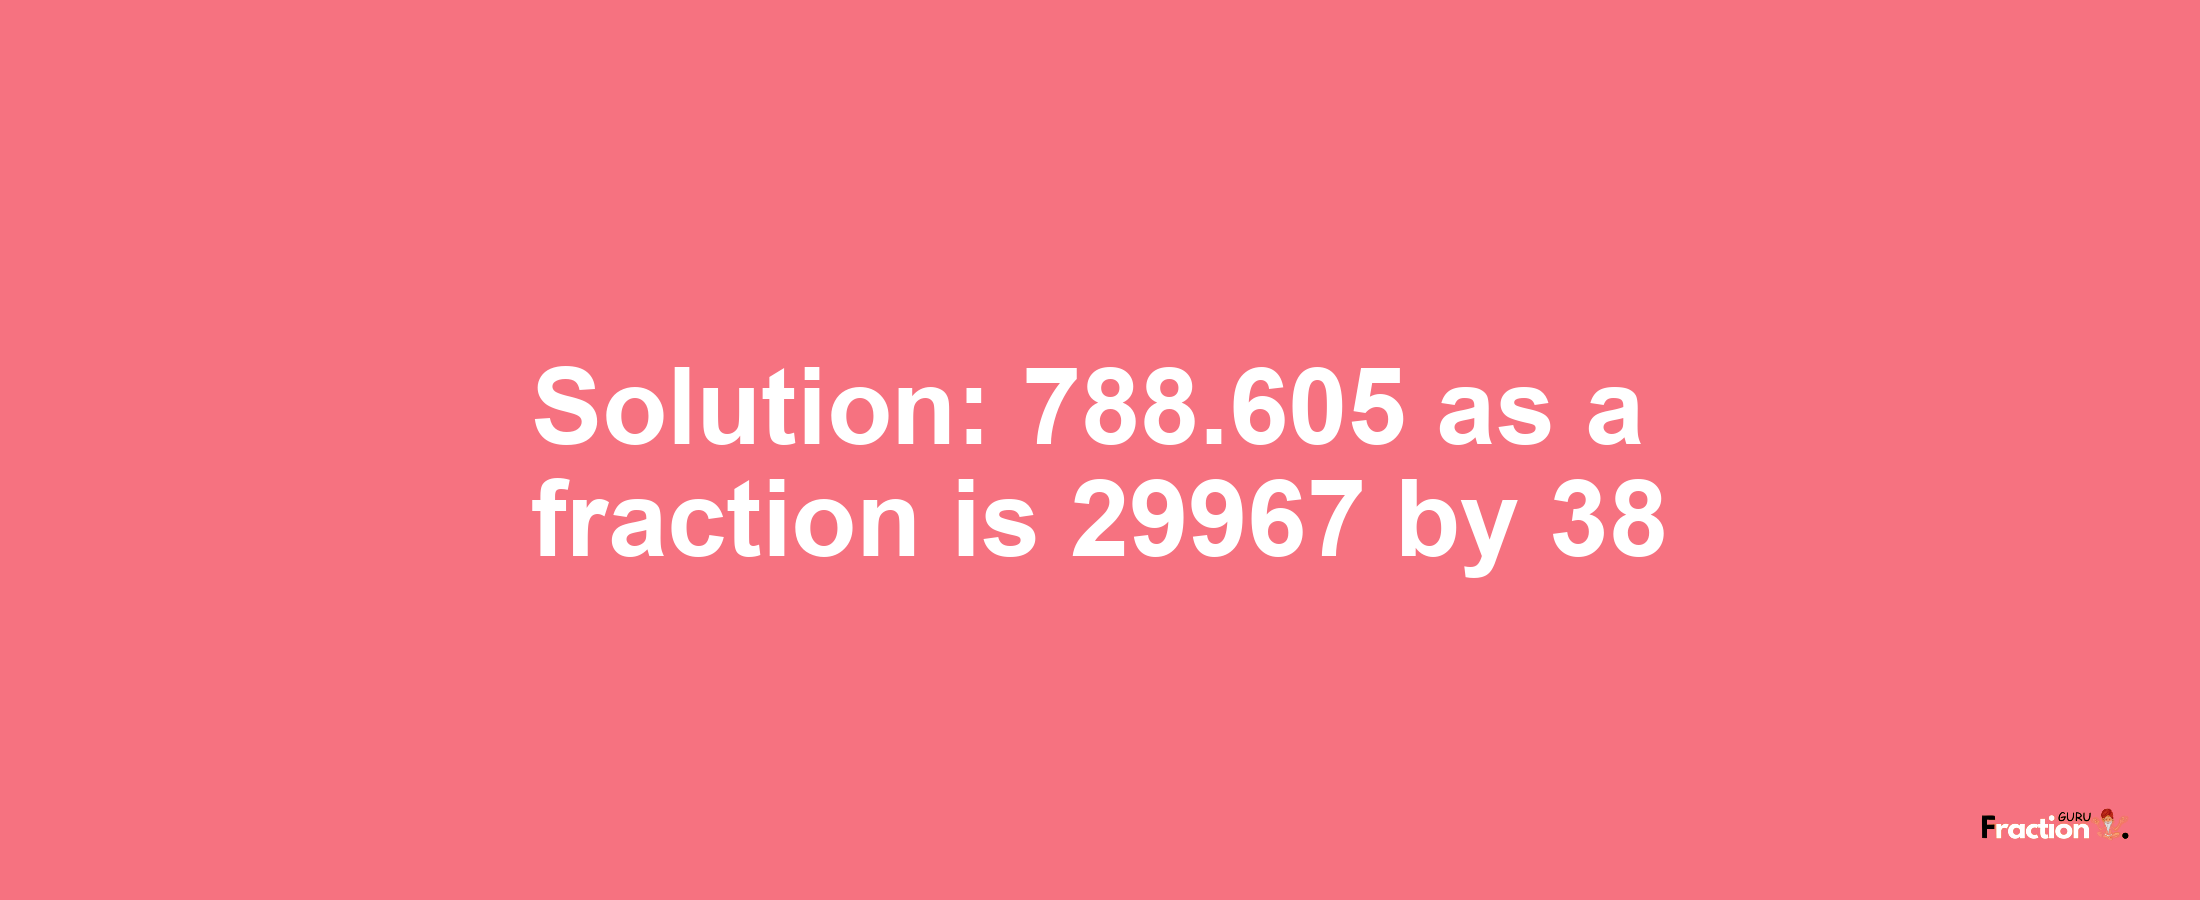 Solution:788.605 as a fraction is 29967/38